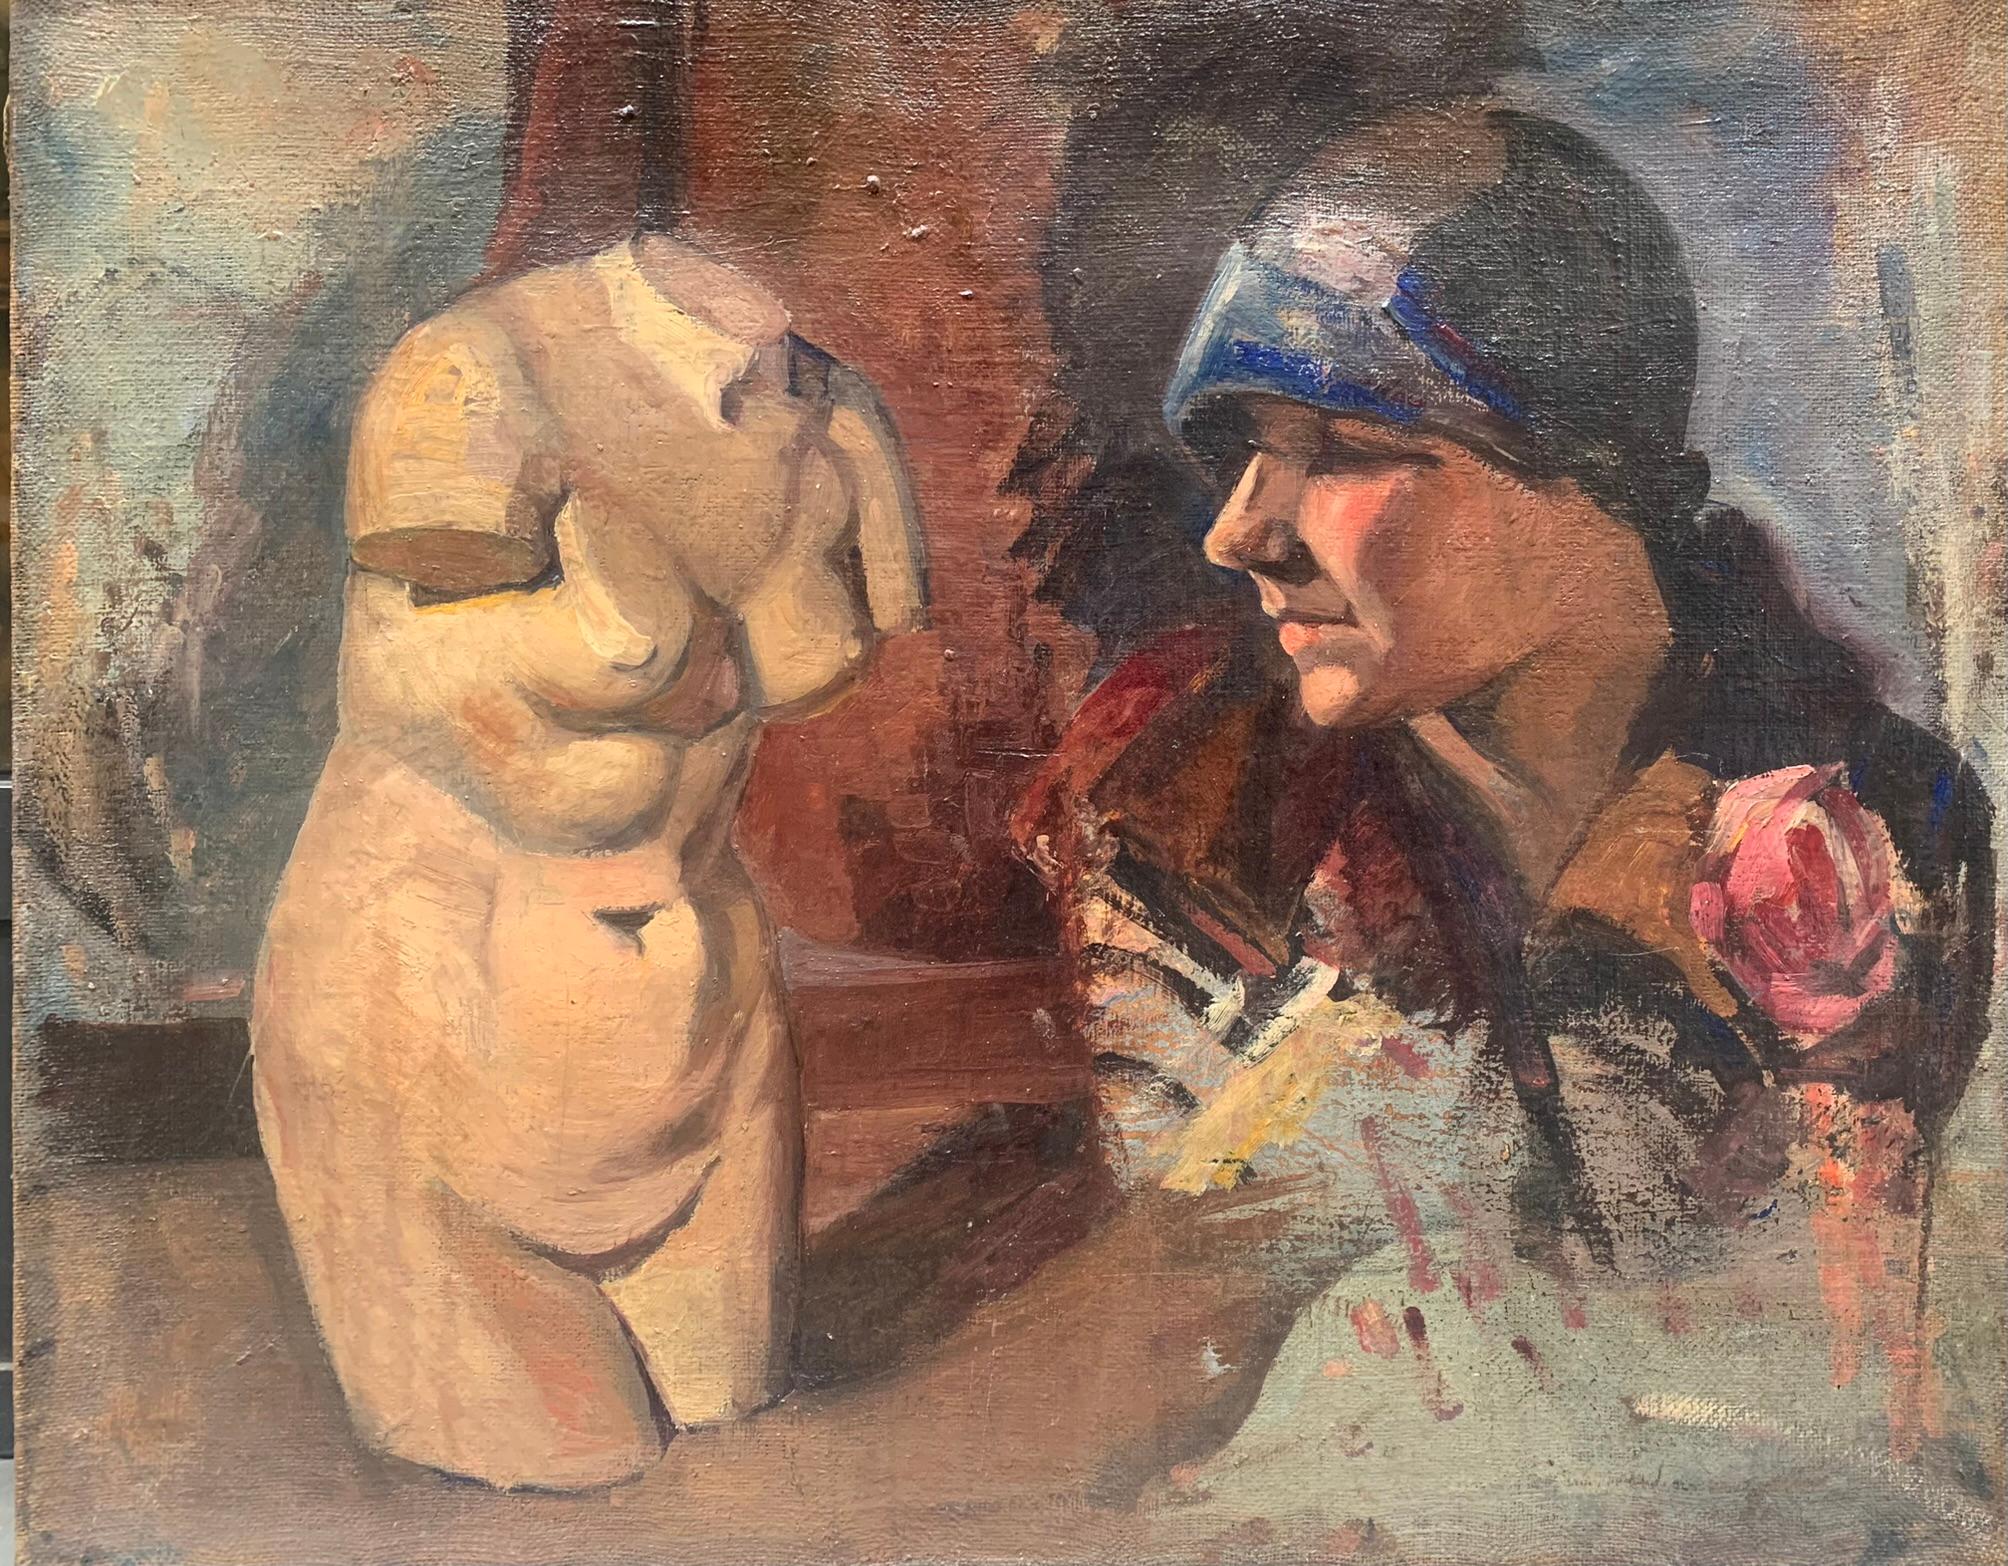 Unknown Portrait Painting - Female Torso And Portrait Of The 1920s. Double Sketch On Canvas.